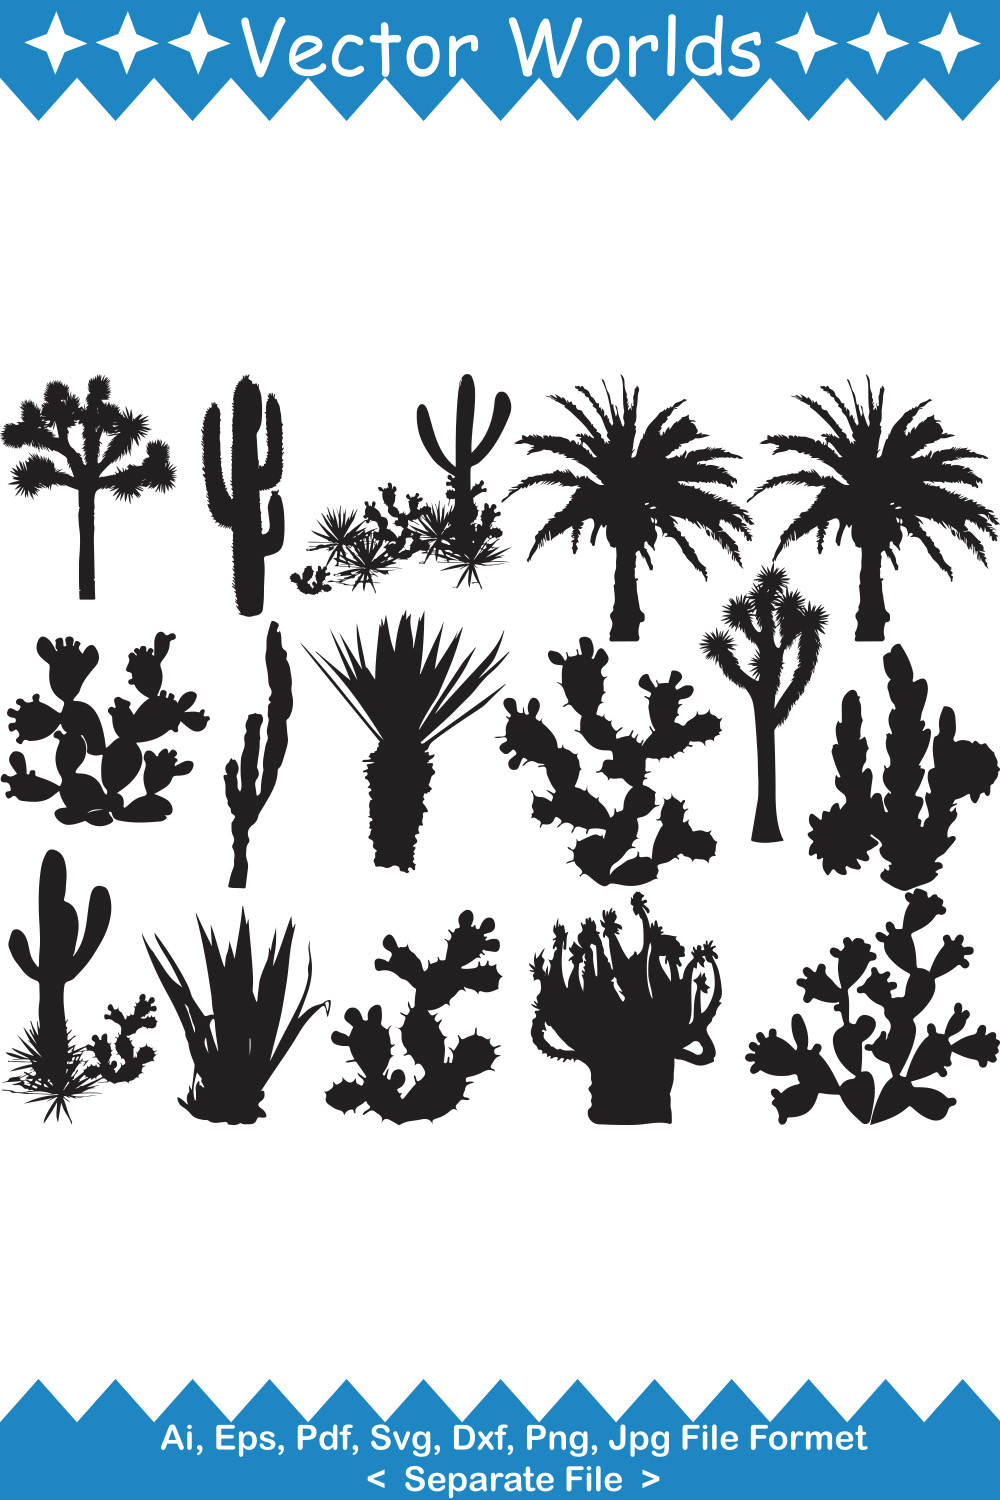 Collection of beautiful vector images of cactus tree silhouettes.